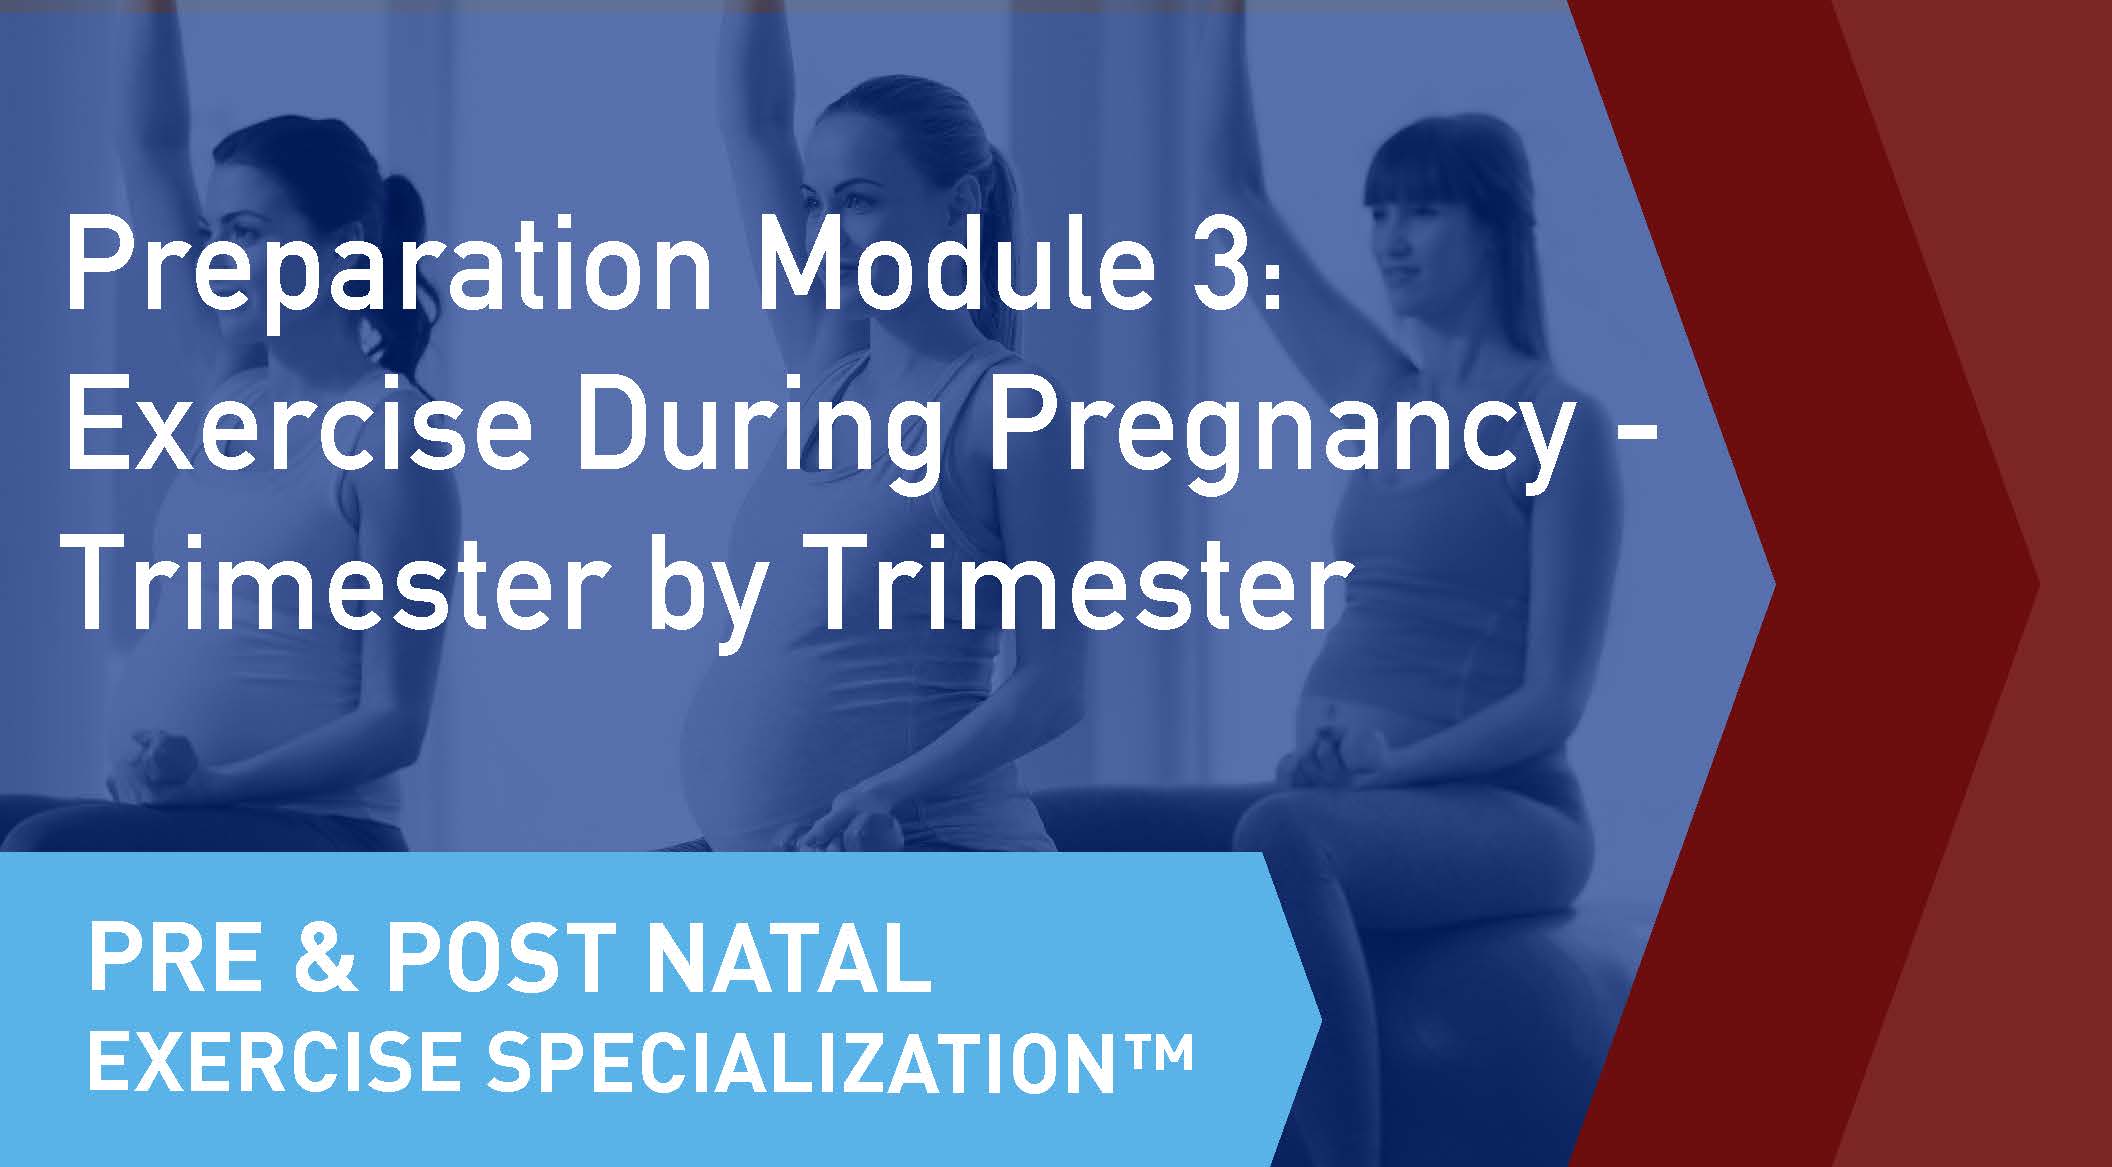 The online learning module cover of the CSEP Pre and Postnatal Exercise Specialization Preparation Module 3